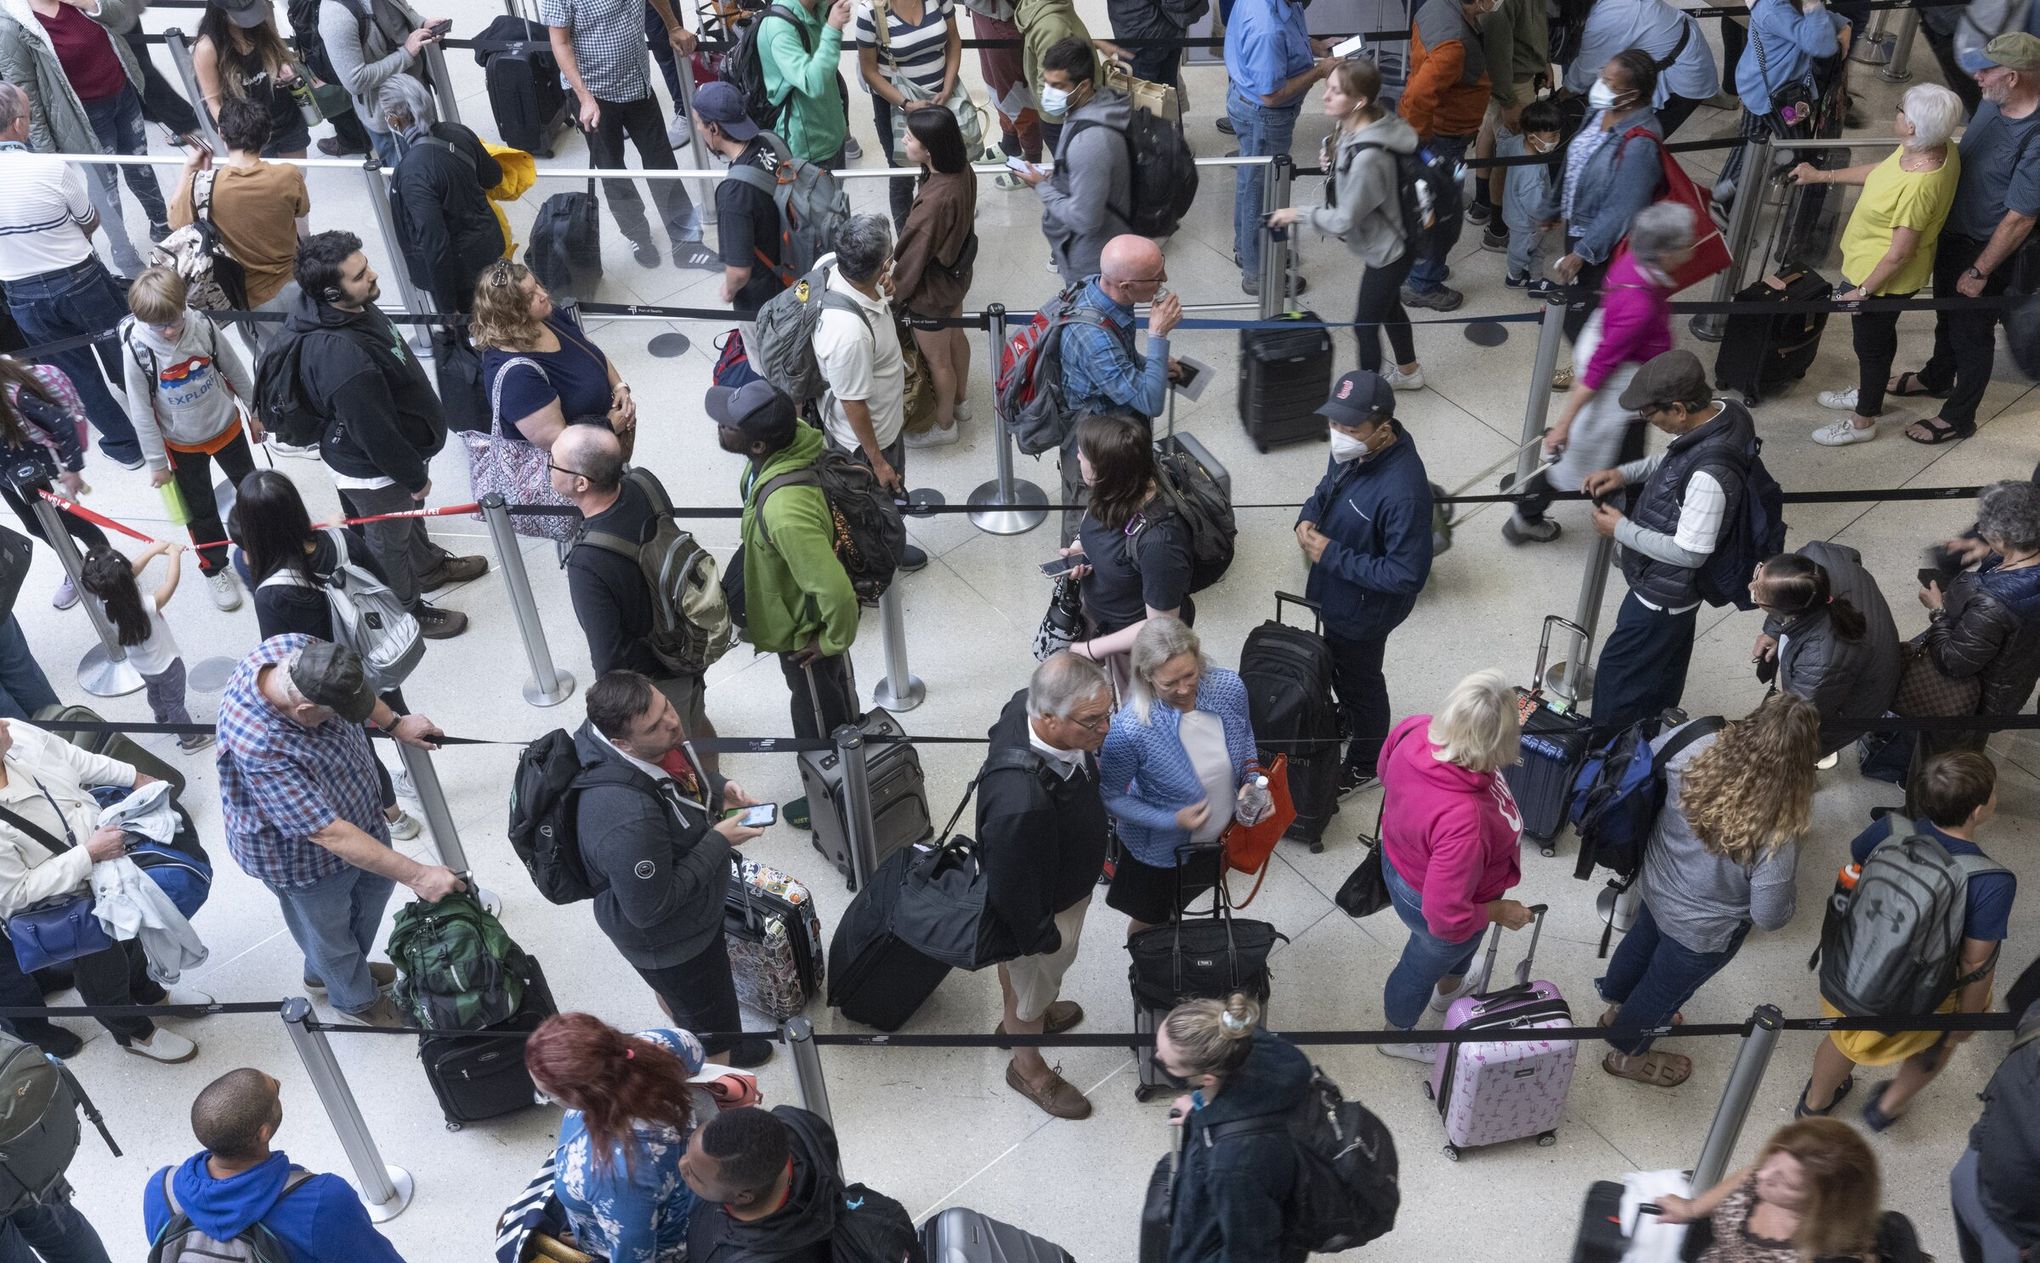 Spot Saver is the Secret Way to Skip the Line at Sea-Tac Airport